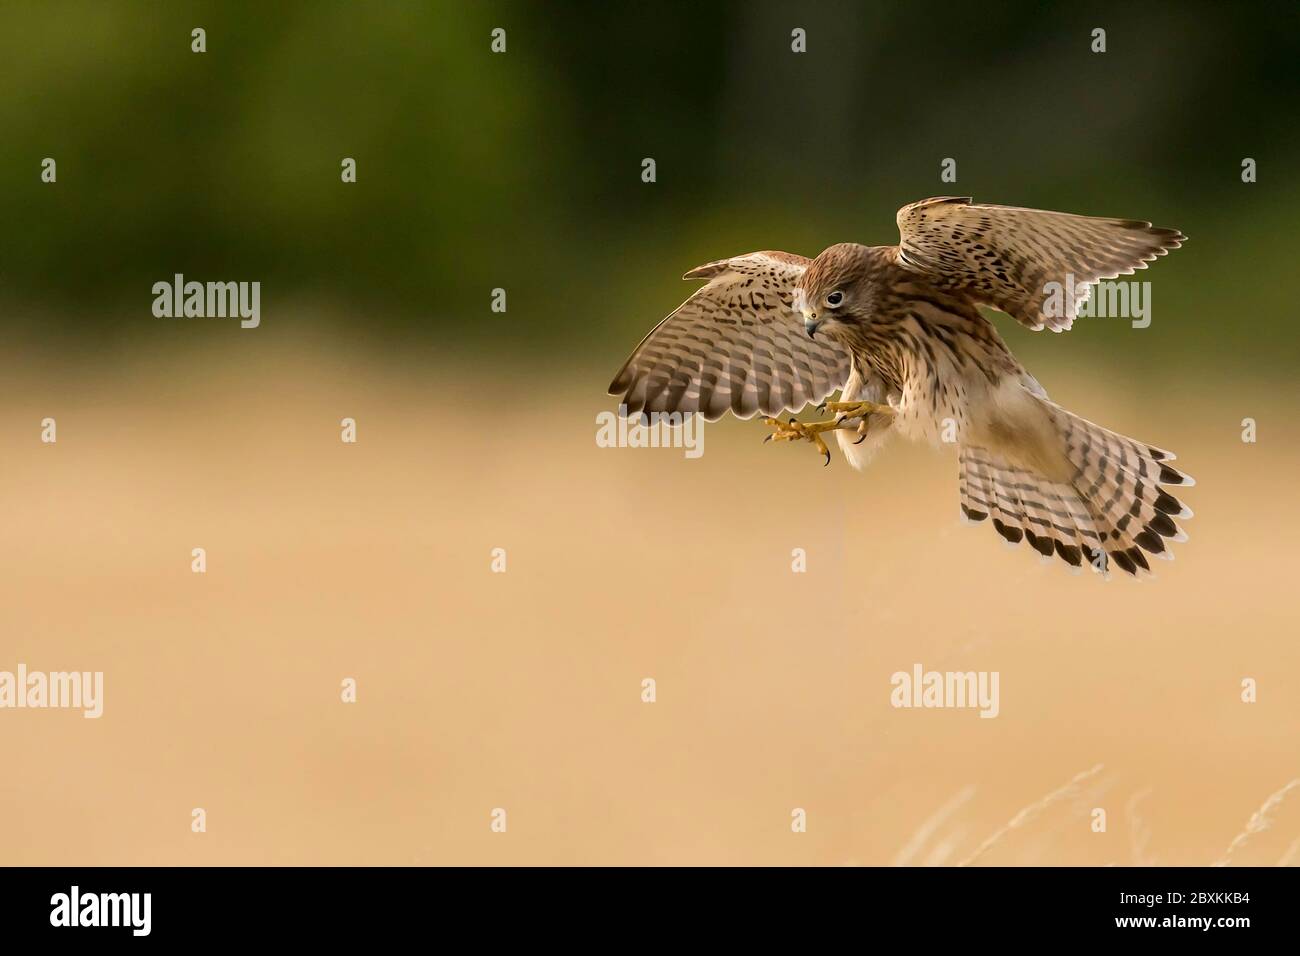 Common Kestrel Falco tunnunculas just about to attack a prey item on a Norfolk Farm UK. Stock Photo